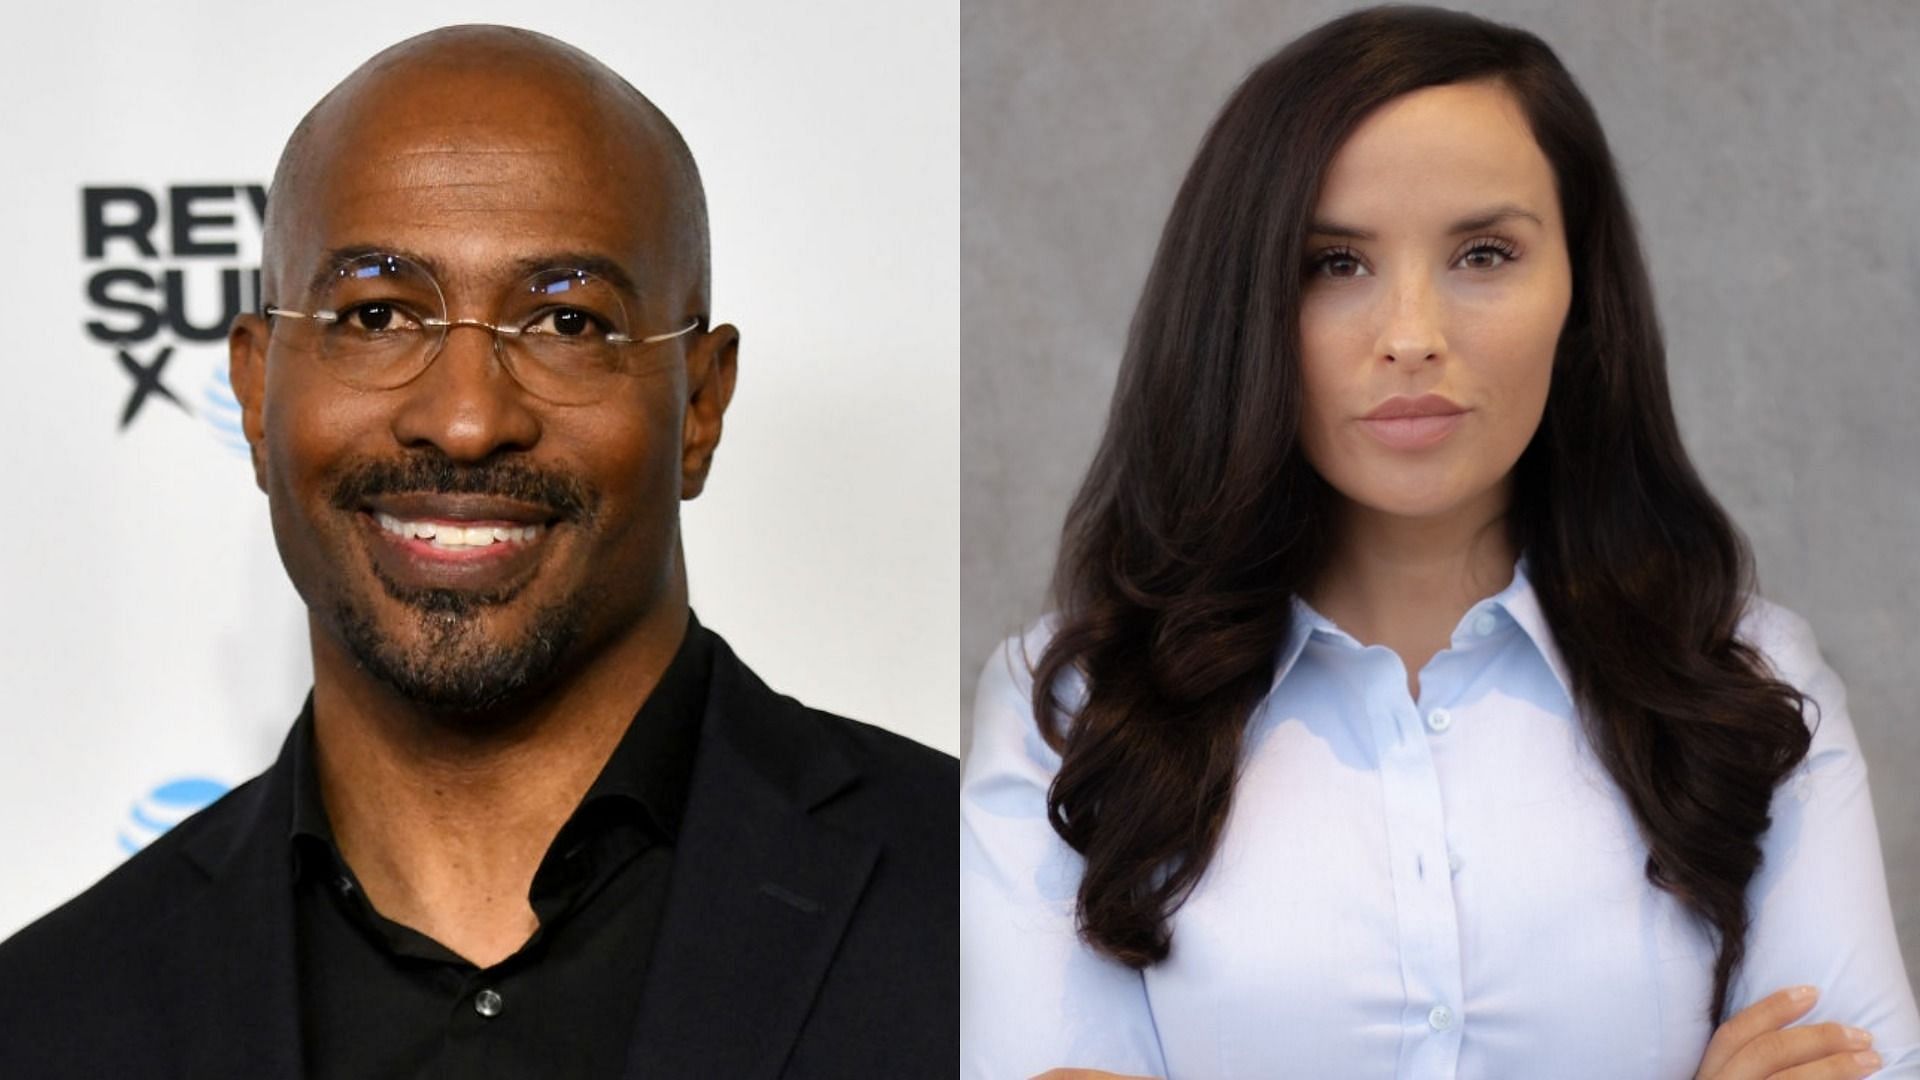 Van Jones recently welcomed a child with his friend and co-parenting partner Noemi Zamacona (Images via Scott Dudelson/Getty Images and Noemi Zamacona/LinkedIn)